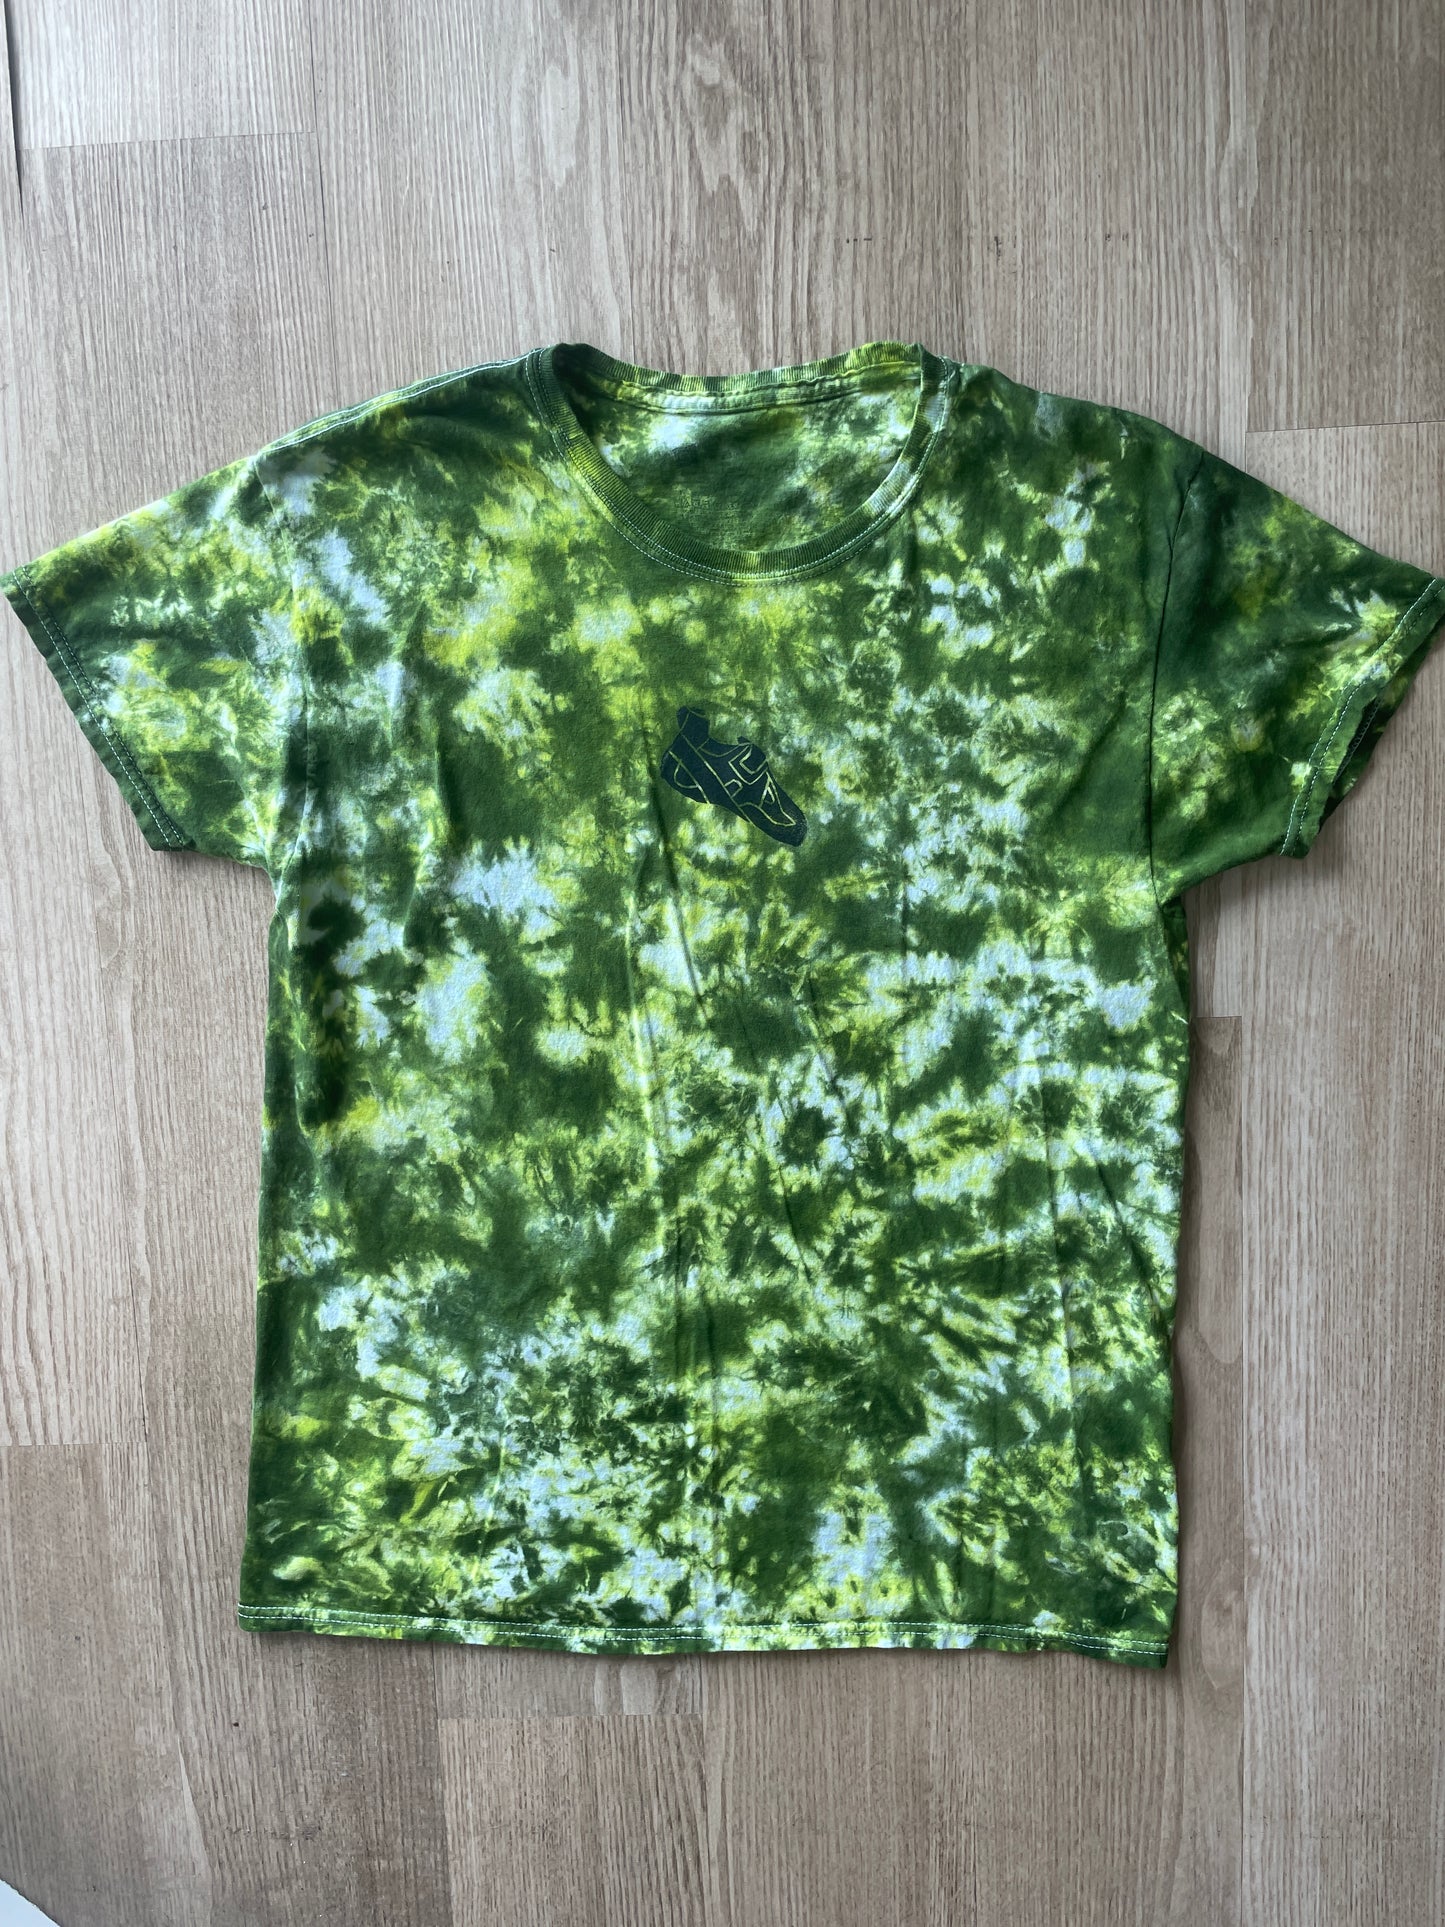 Large Men’s Climbing Shoe Tie Dye T-Shirt | One-Of-a-Kind Green and White Crumpled Short Sleeve